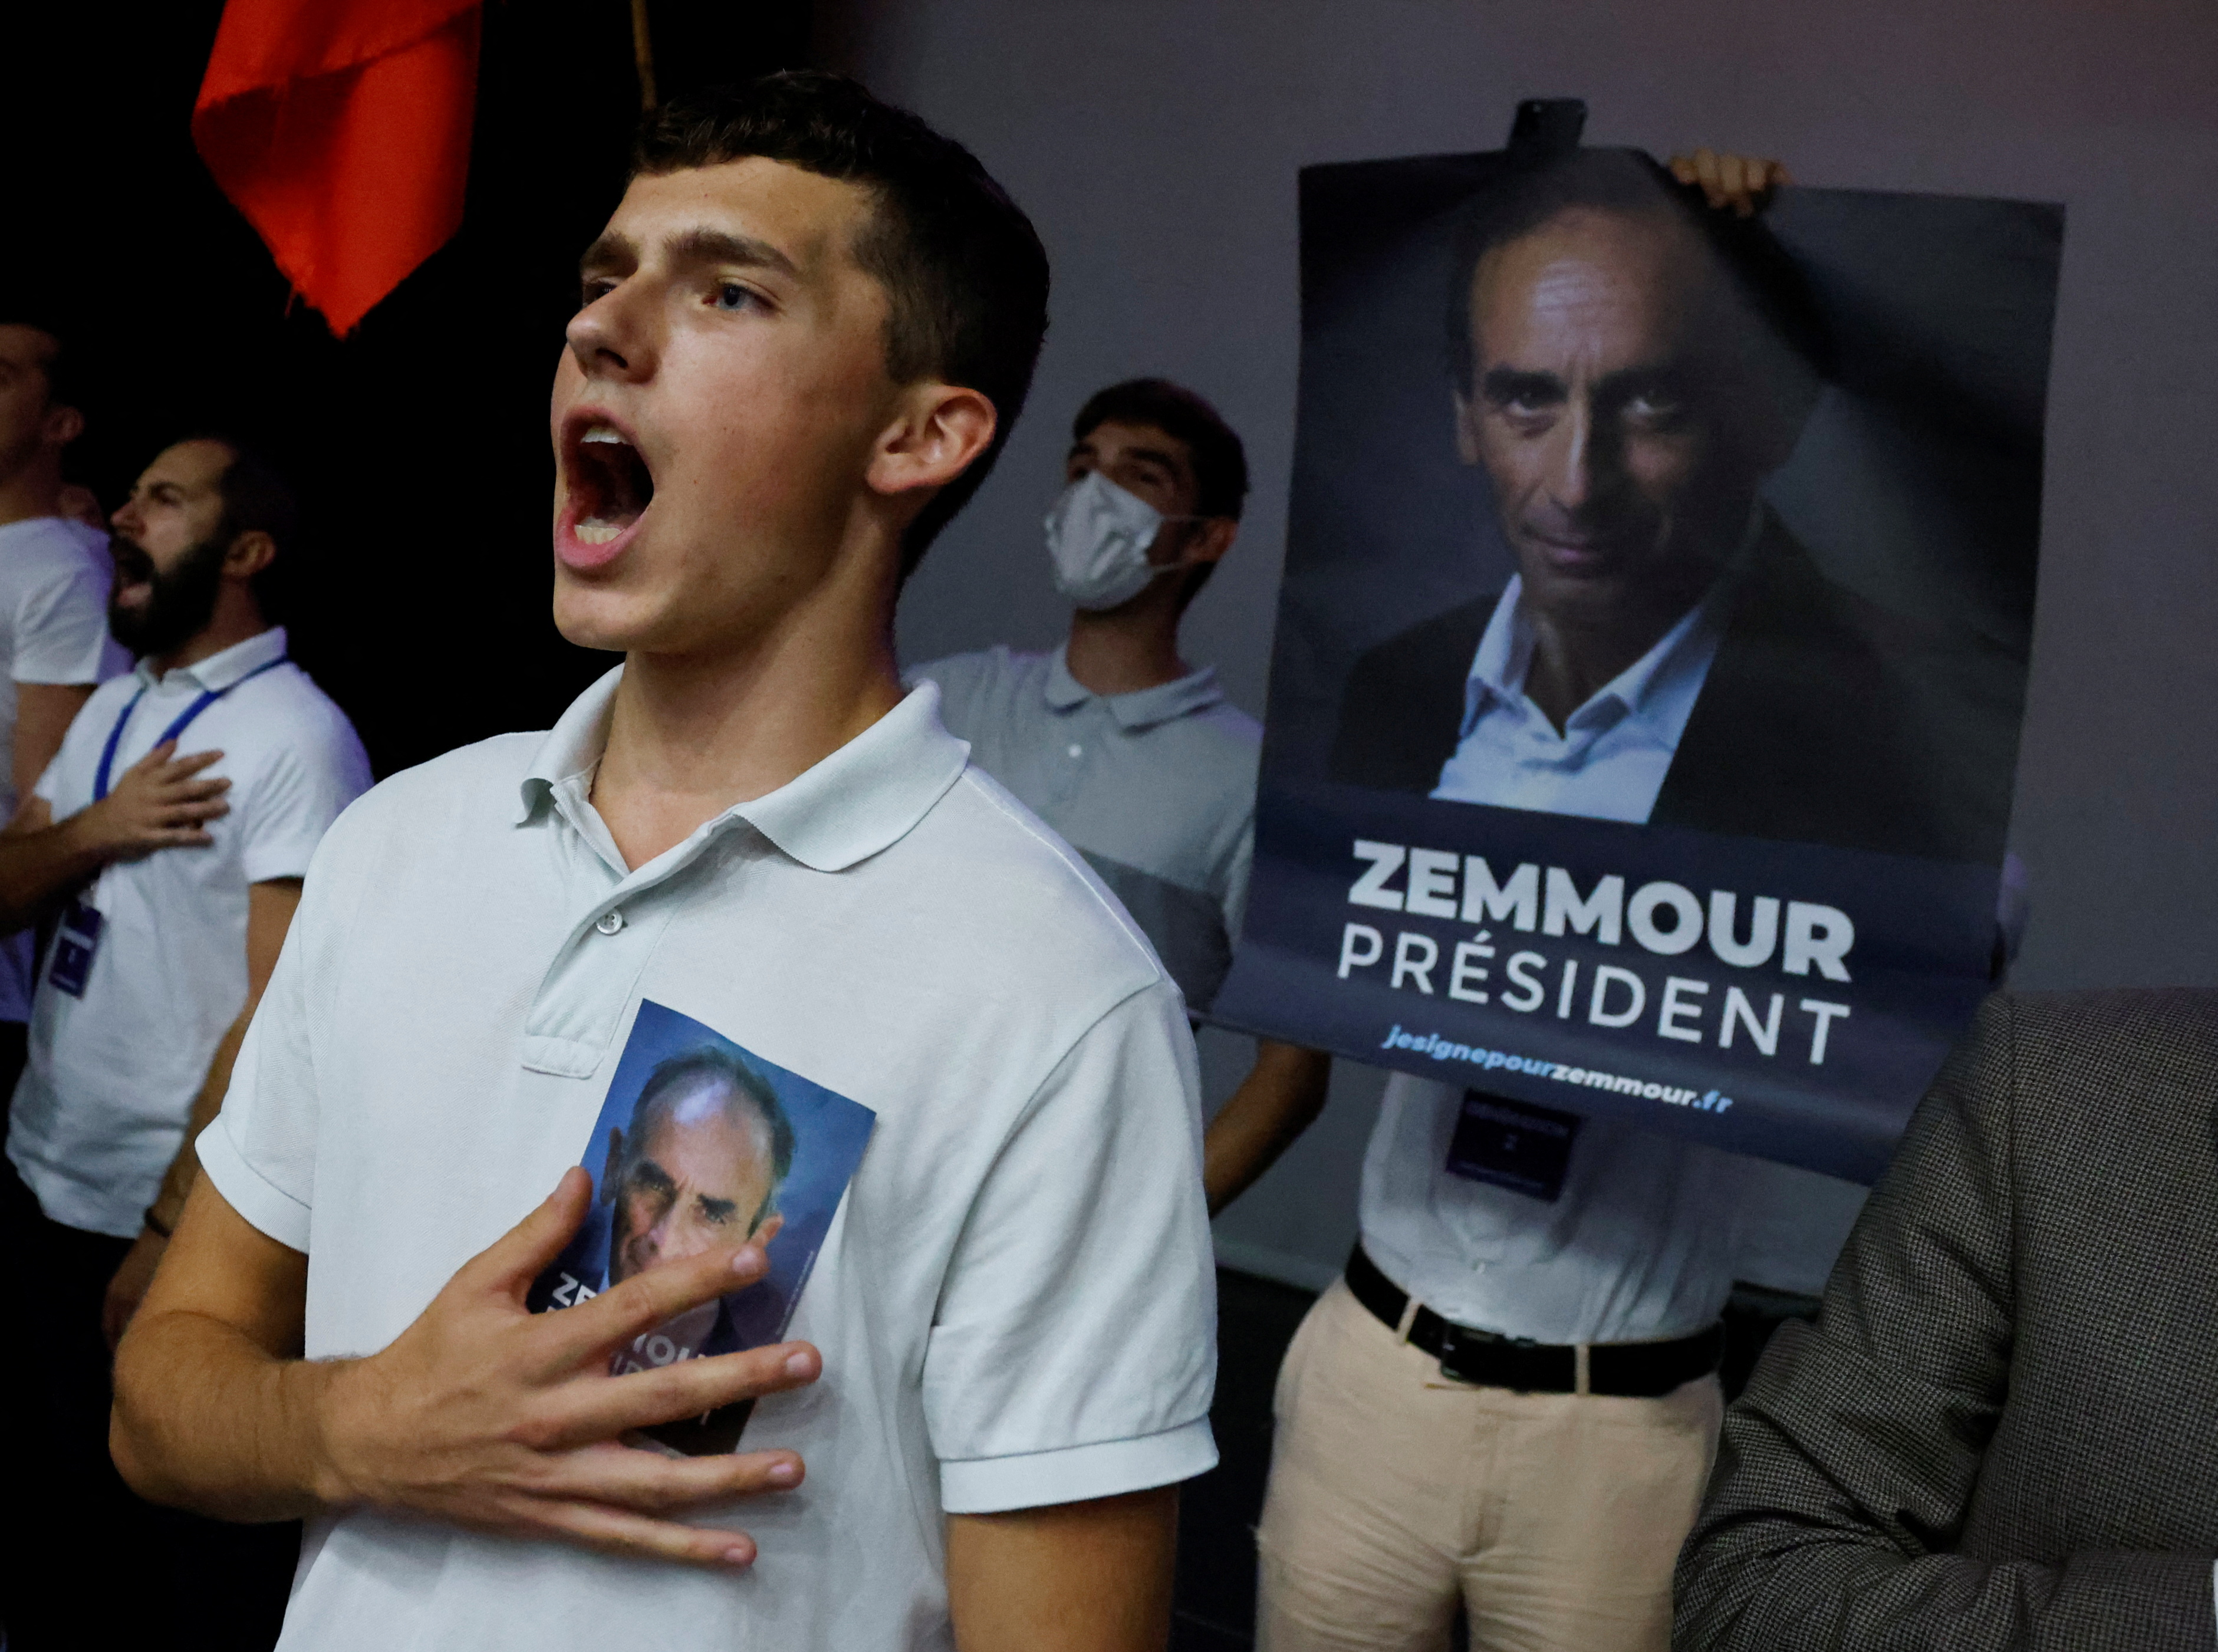 Supporters of French right-wing extremist commentator Eric Zemmour attend a meeting in Beziers, France, on October 16, 2021. REUTERS / Eric Gaillard